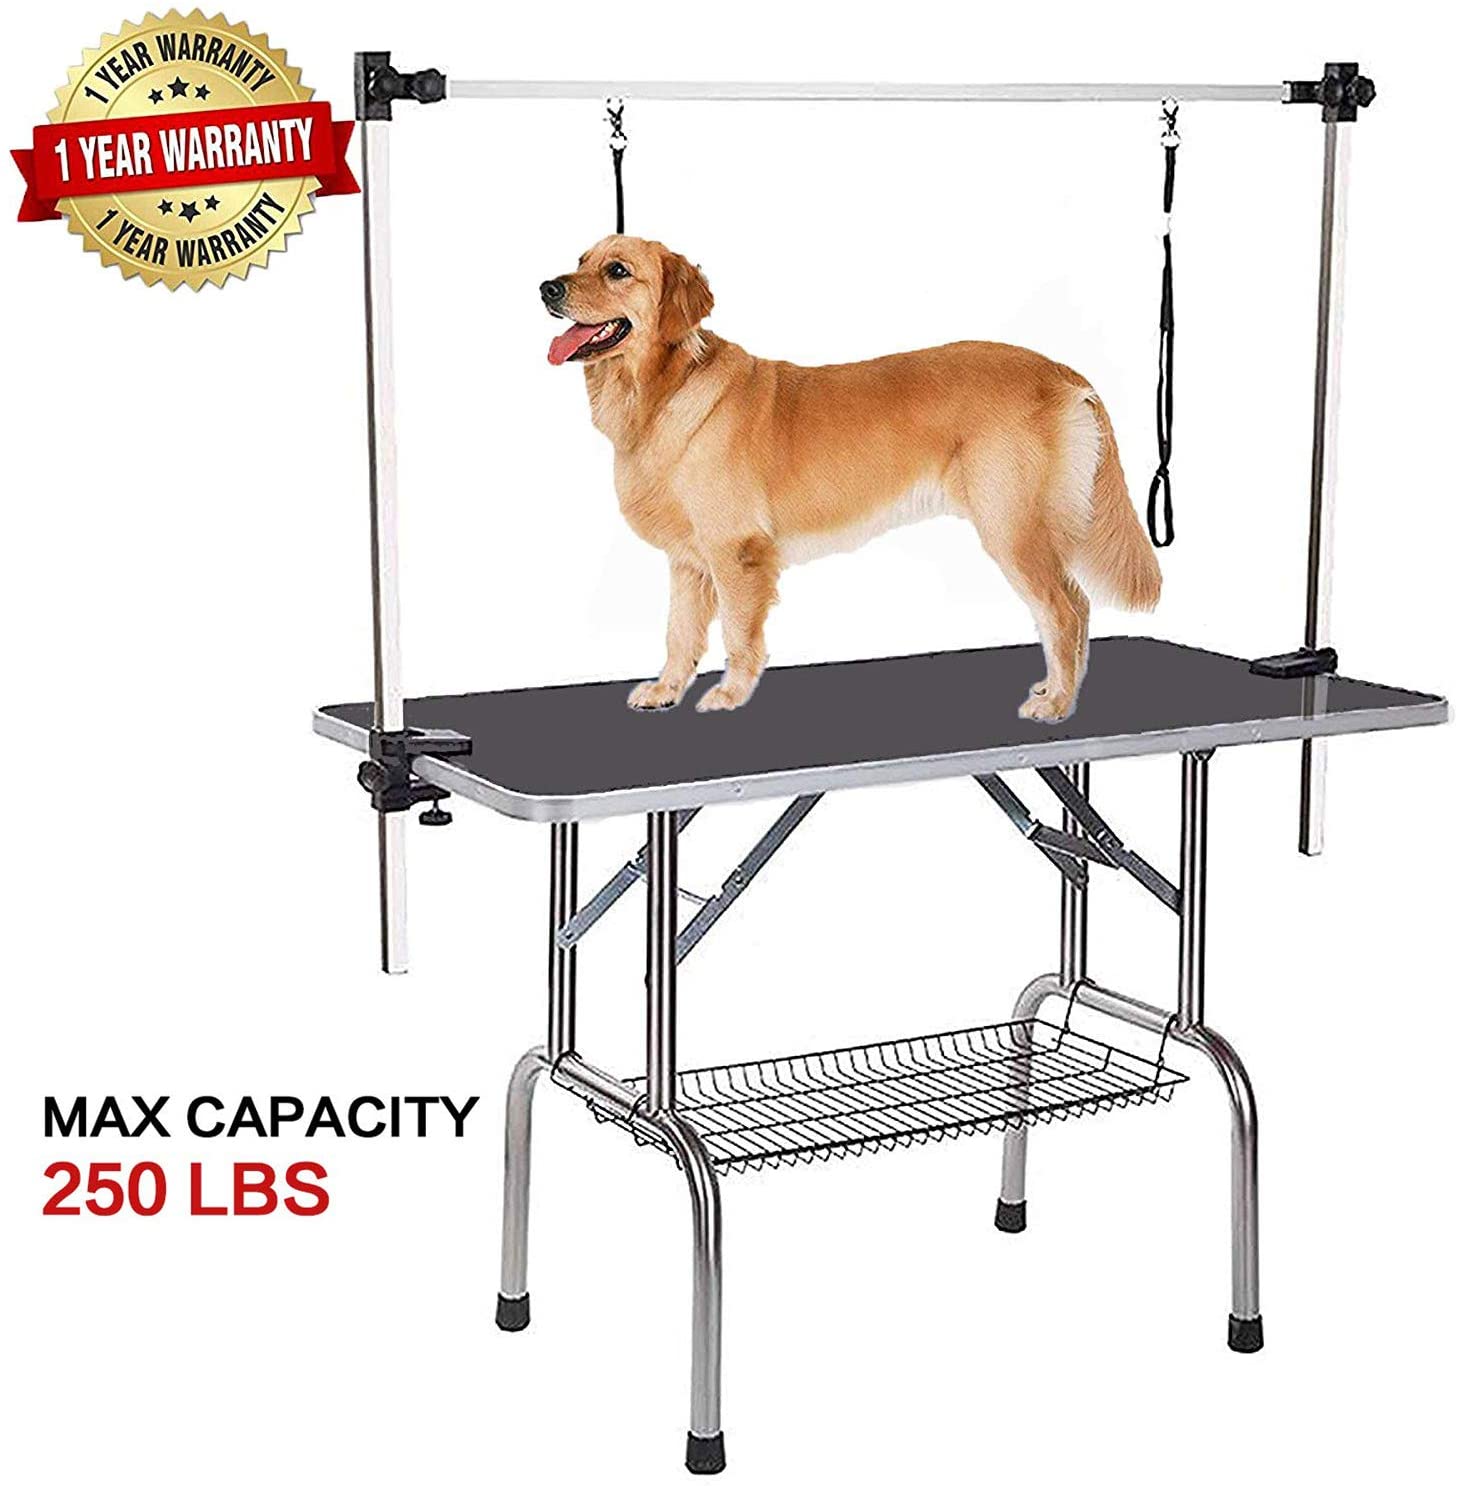 Mondawe Medium Dog Grooming Table - Adjustable Height, Metal Frame, Non-Slip Surface - Blue Stainless Steel | MD-WF2821A